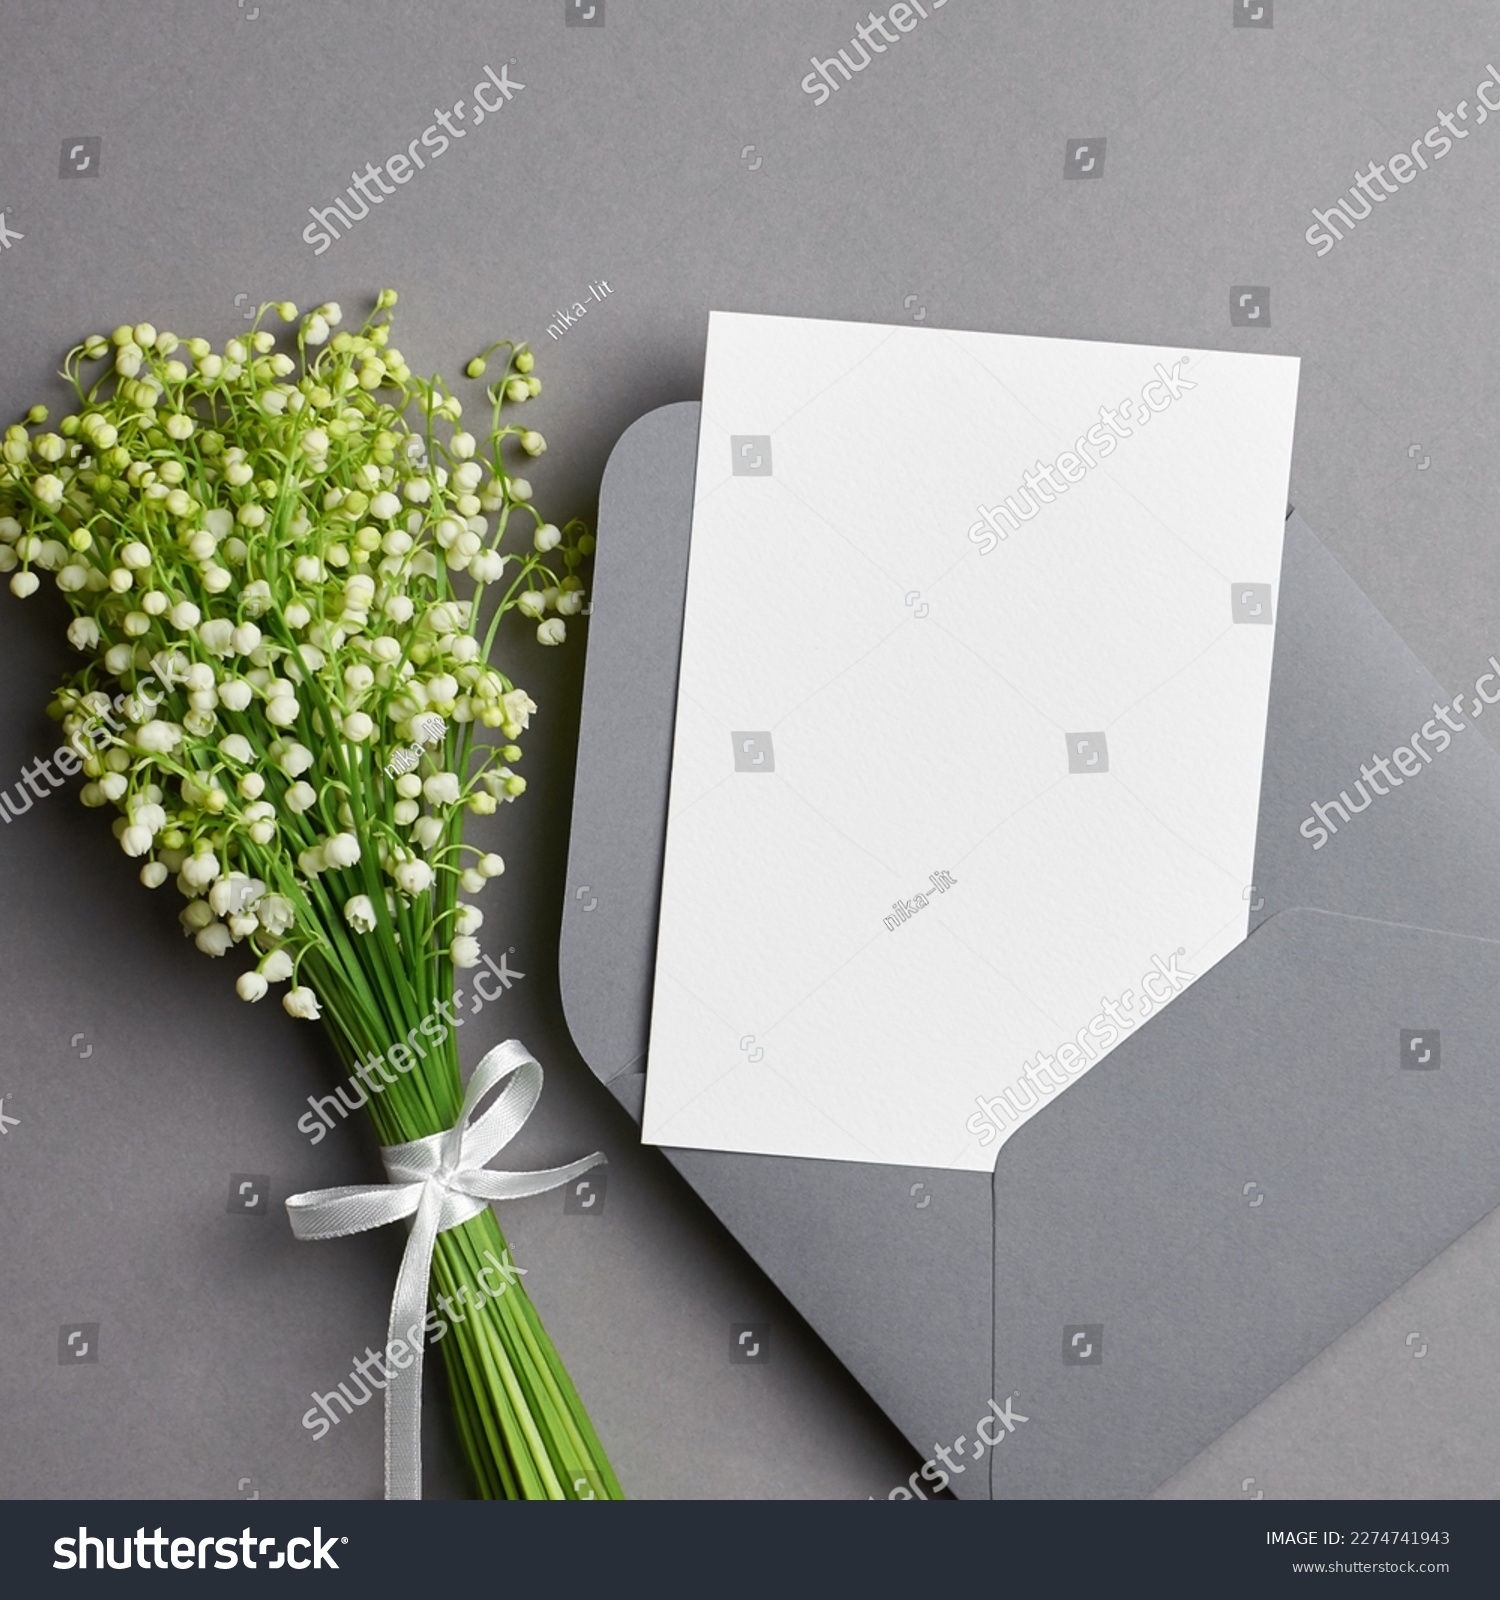 Blank wedding invitation card mockup with white lily of the valley flowers on grey background #2274741943